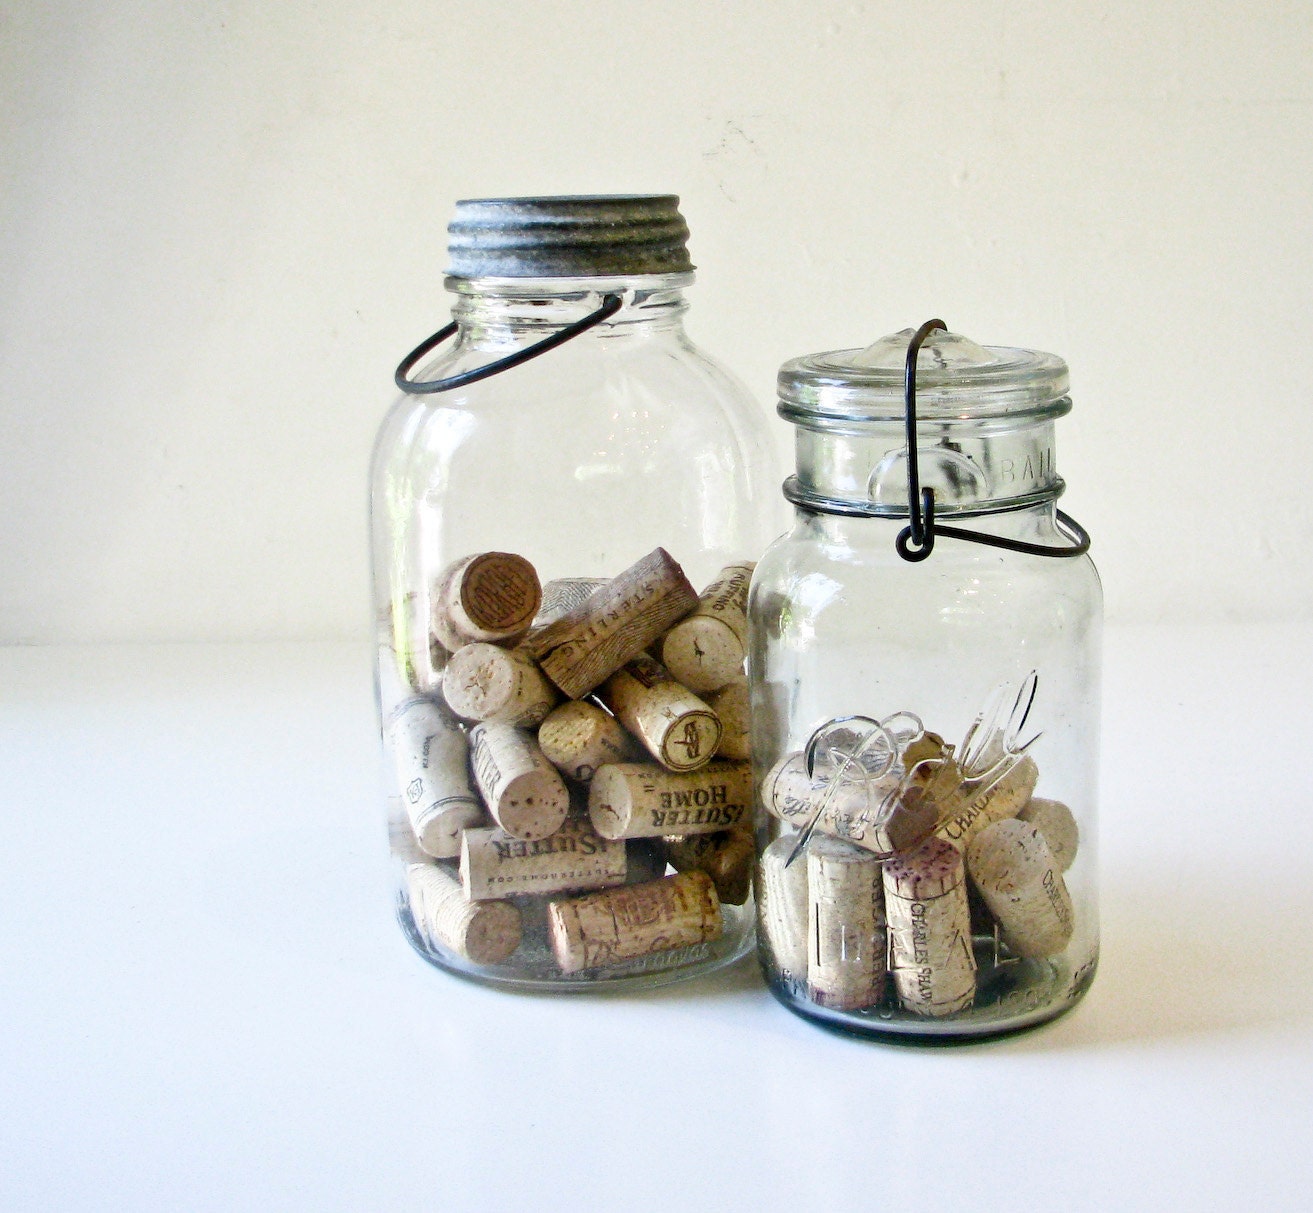 Vintage Glass Jars - 1 with Zinc Lid -  1 With Glass Lid -Ball Mason and Duraglass Bottles - BeeJayKay